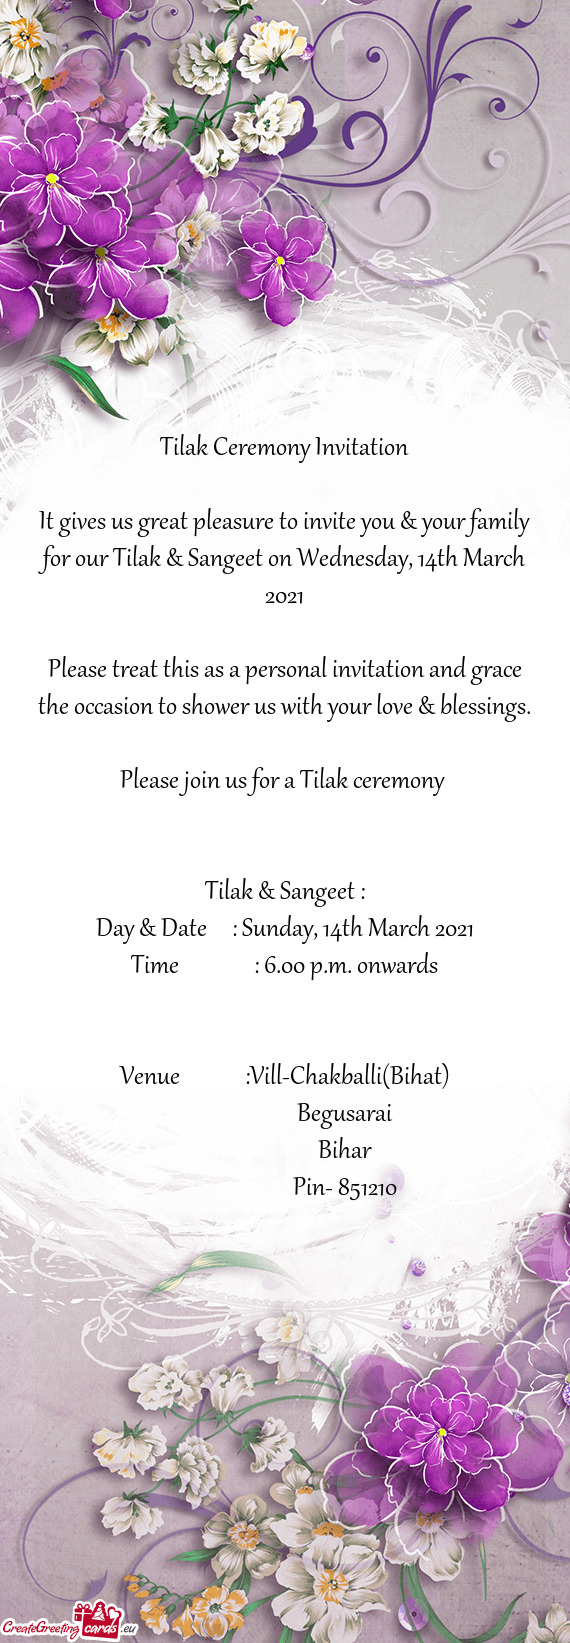 It gives us great pleasure to invite you & your family for our Tilak & Sangeet on Wednesday, 14th Ma